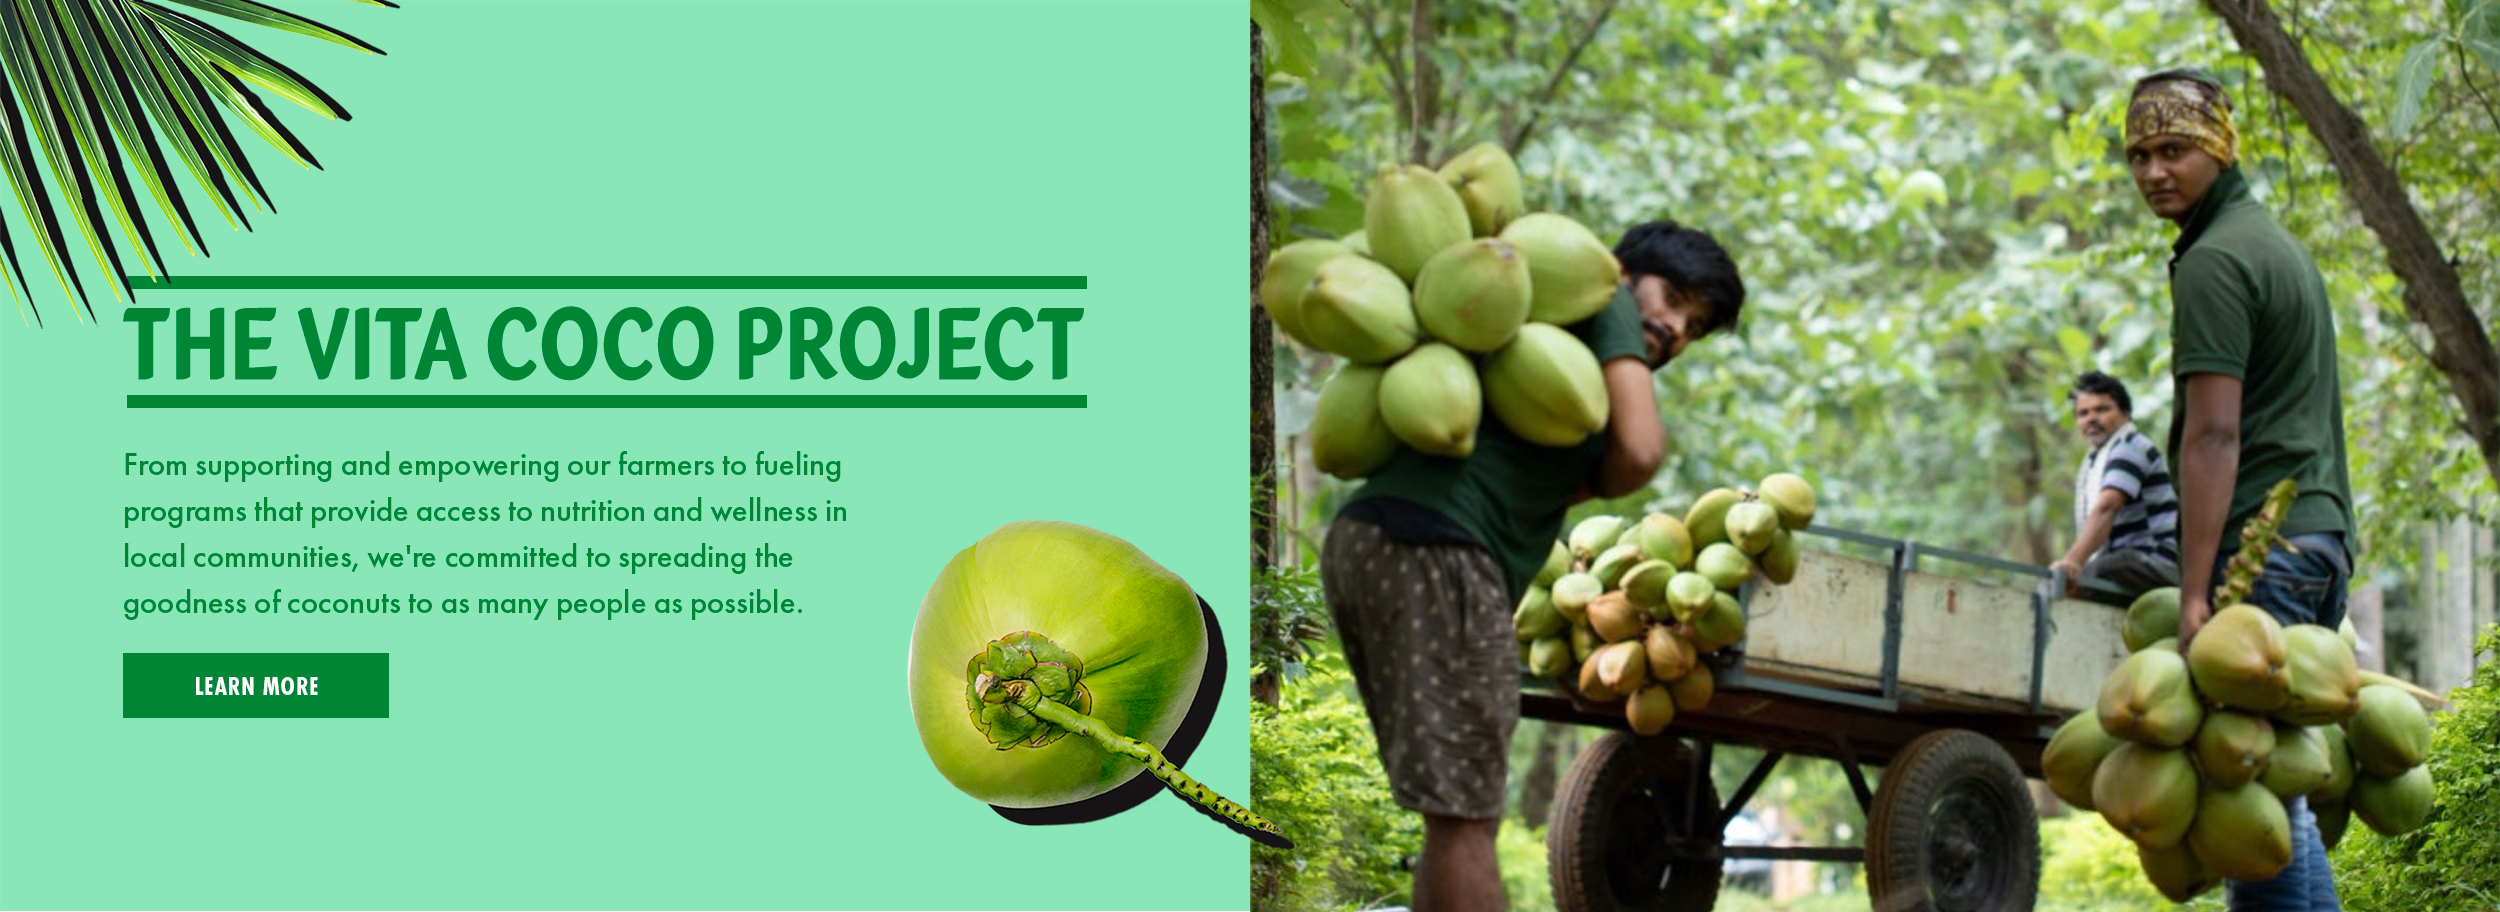 The vita coco project - from supporting and empowering our farmers to fueling programs that provide access to nutrition and wellness in local communities, we're committed to spreading the goodness of coconuts to as many people as possible. LEARN MORE